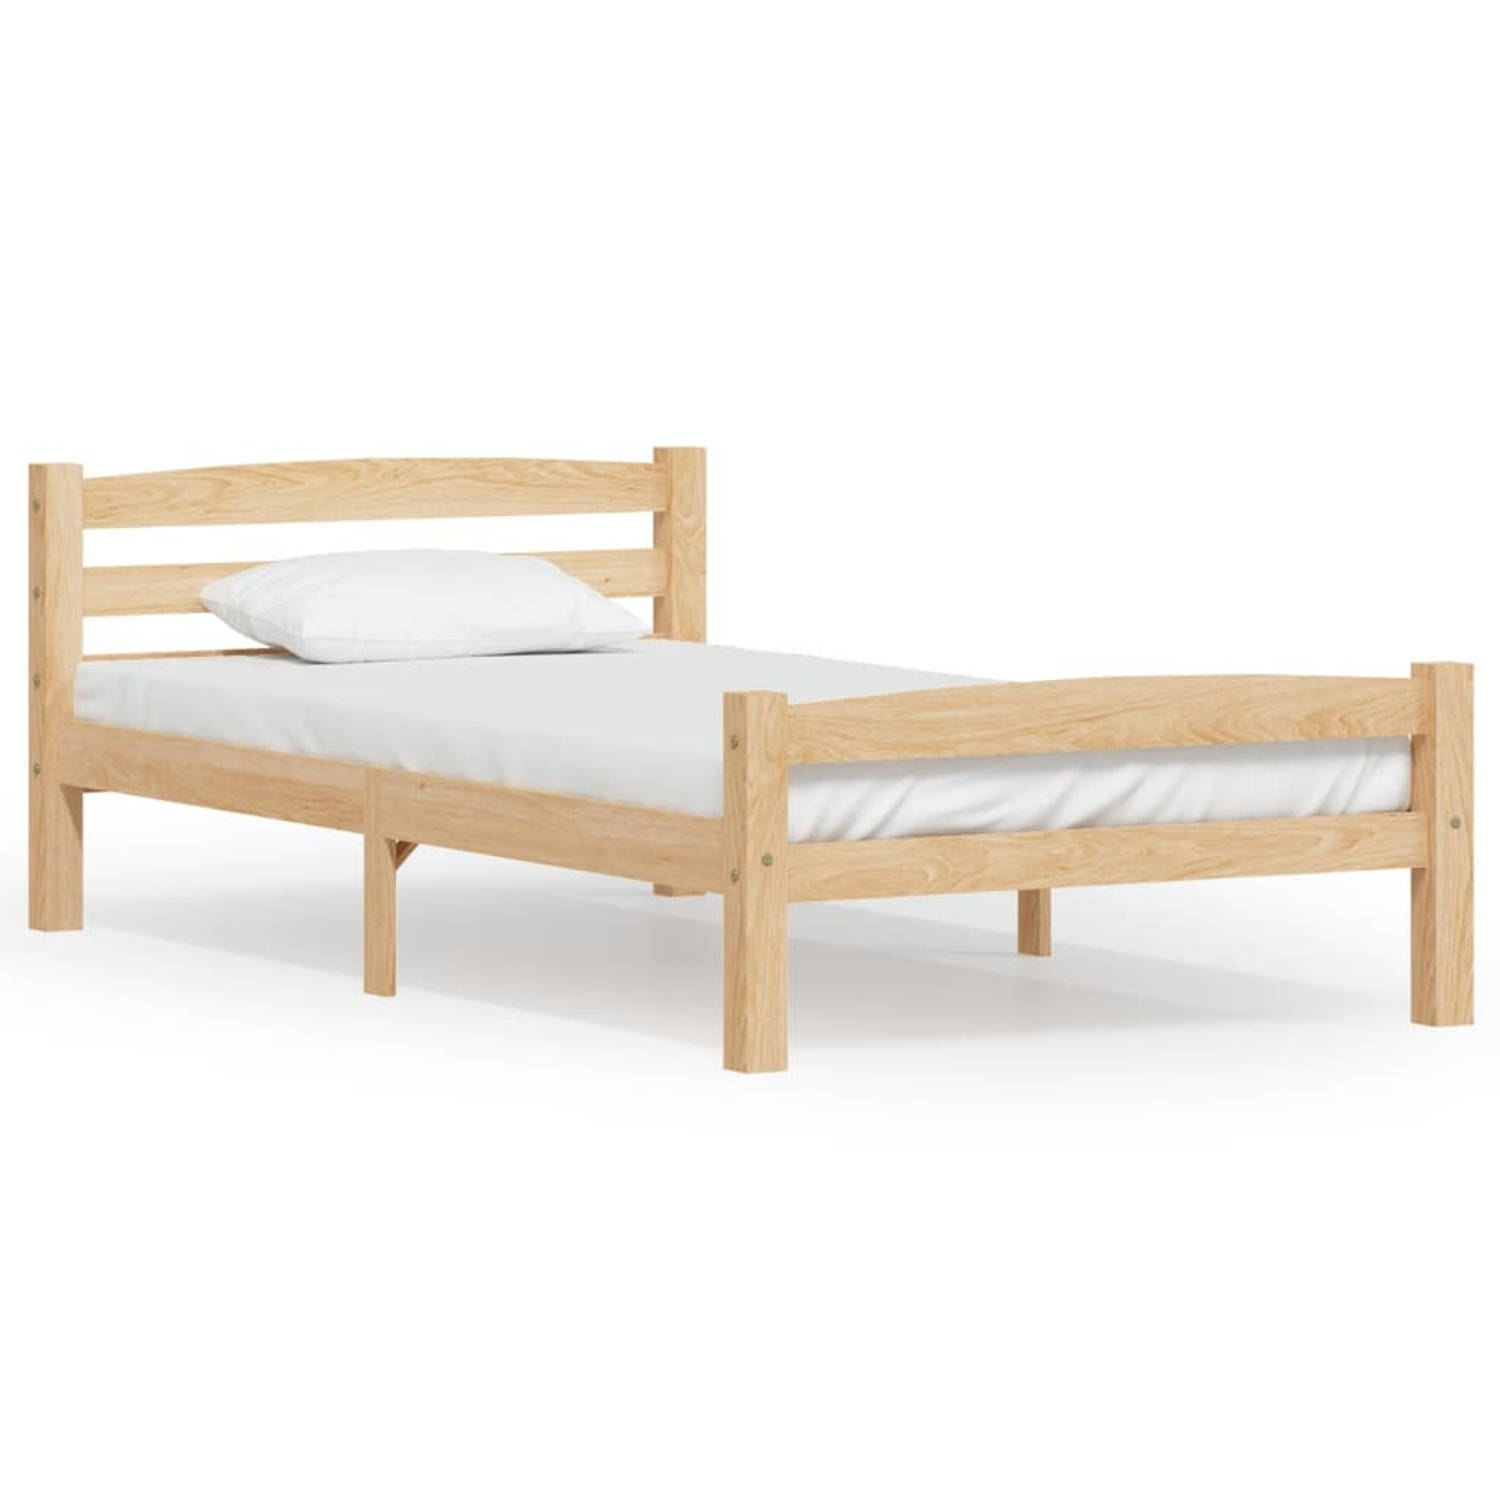 The Living Store Bedframe massief grenenhout 100x200 cm - Bedframe - Bedframe - Bed Frame - Bed Frames - Bed - Bedden - 1-persoonsbed - 1-persoonsbedden - Eenpersoons Bed